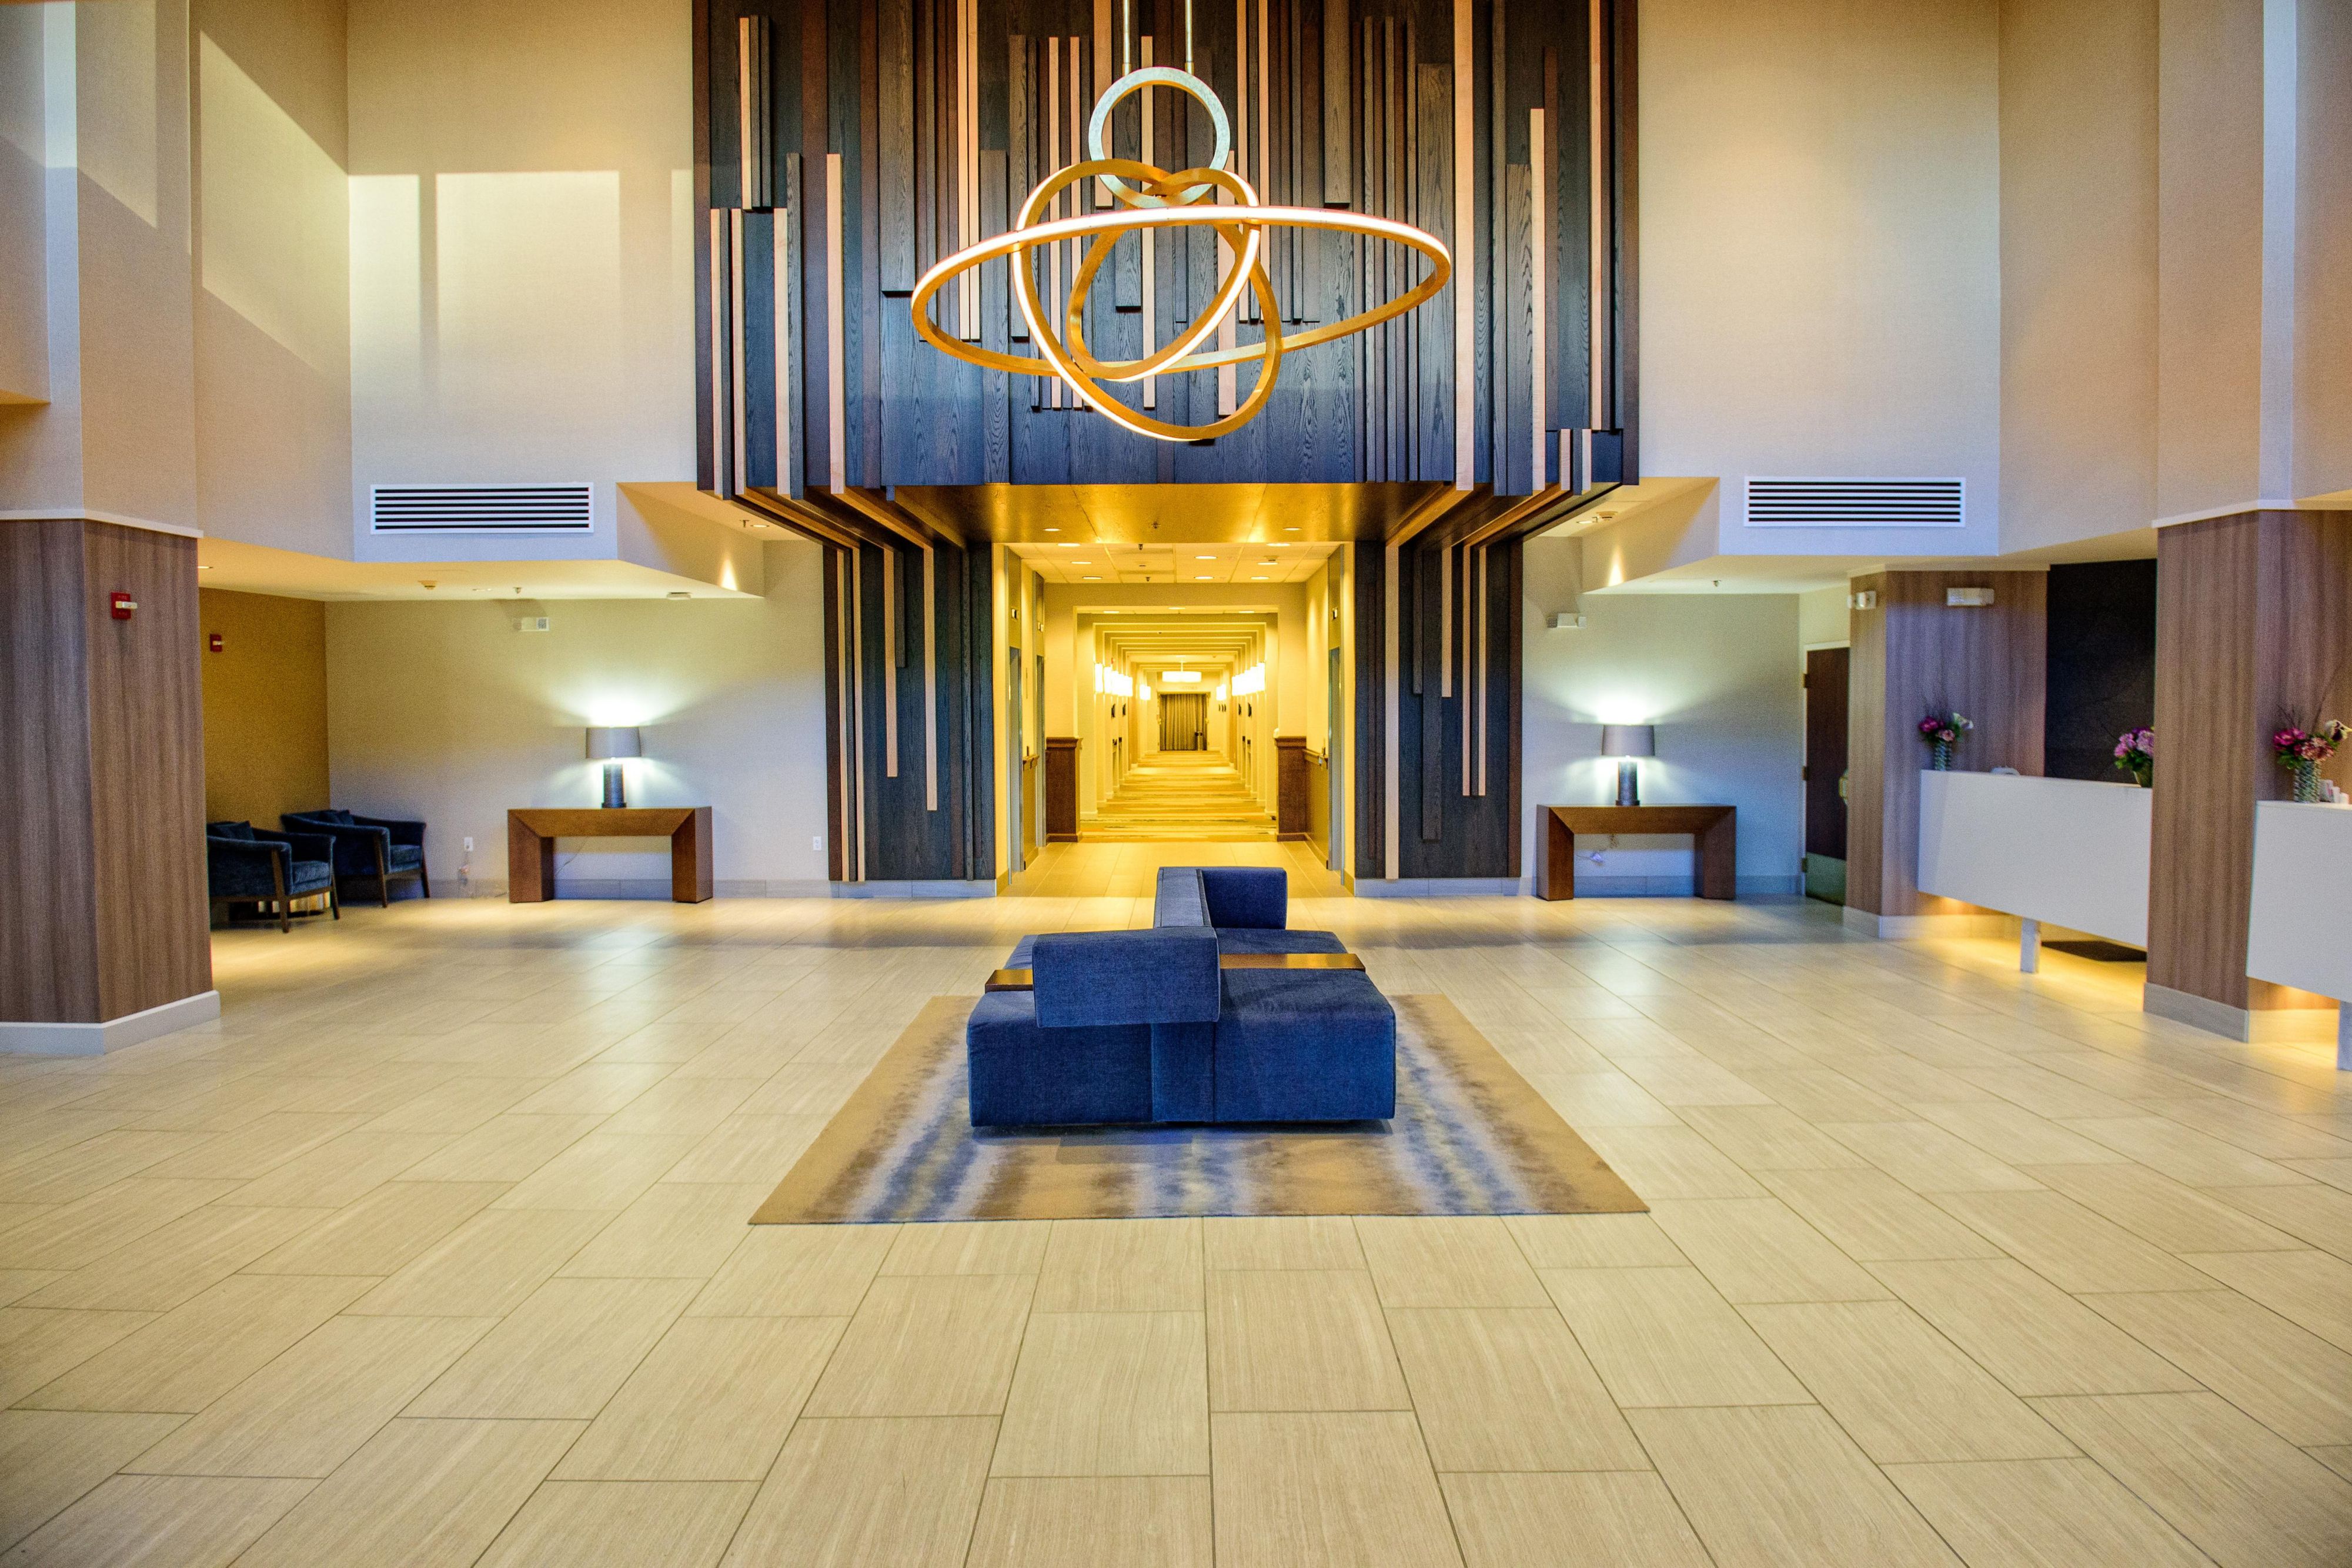 Lobby and front desk at Crowne Plaza Dulles